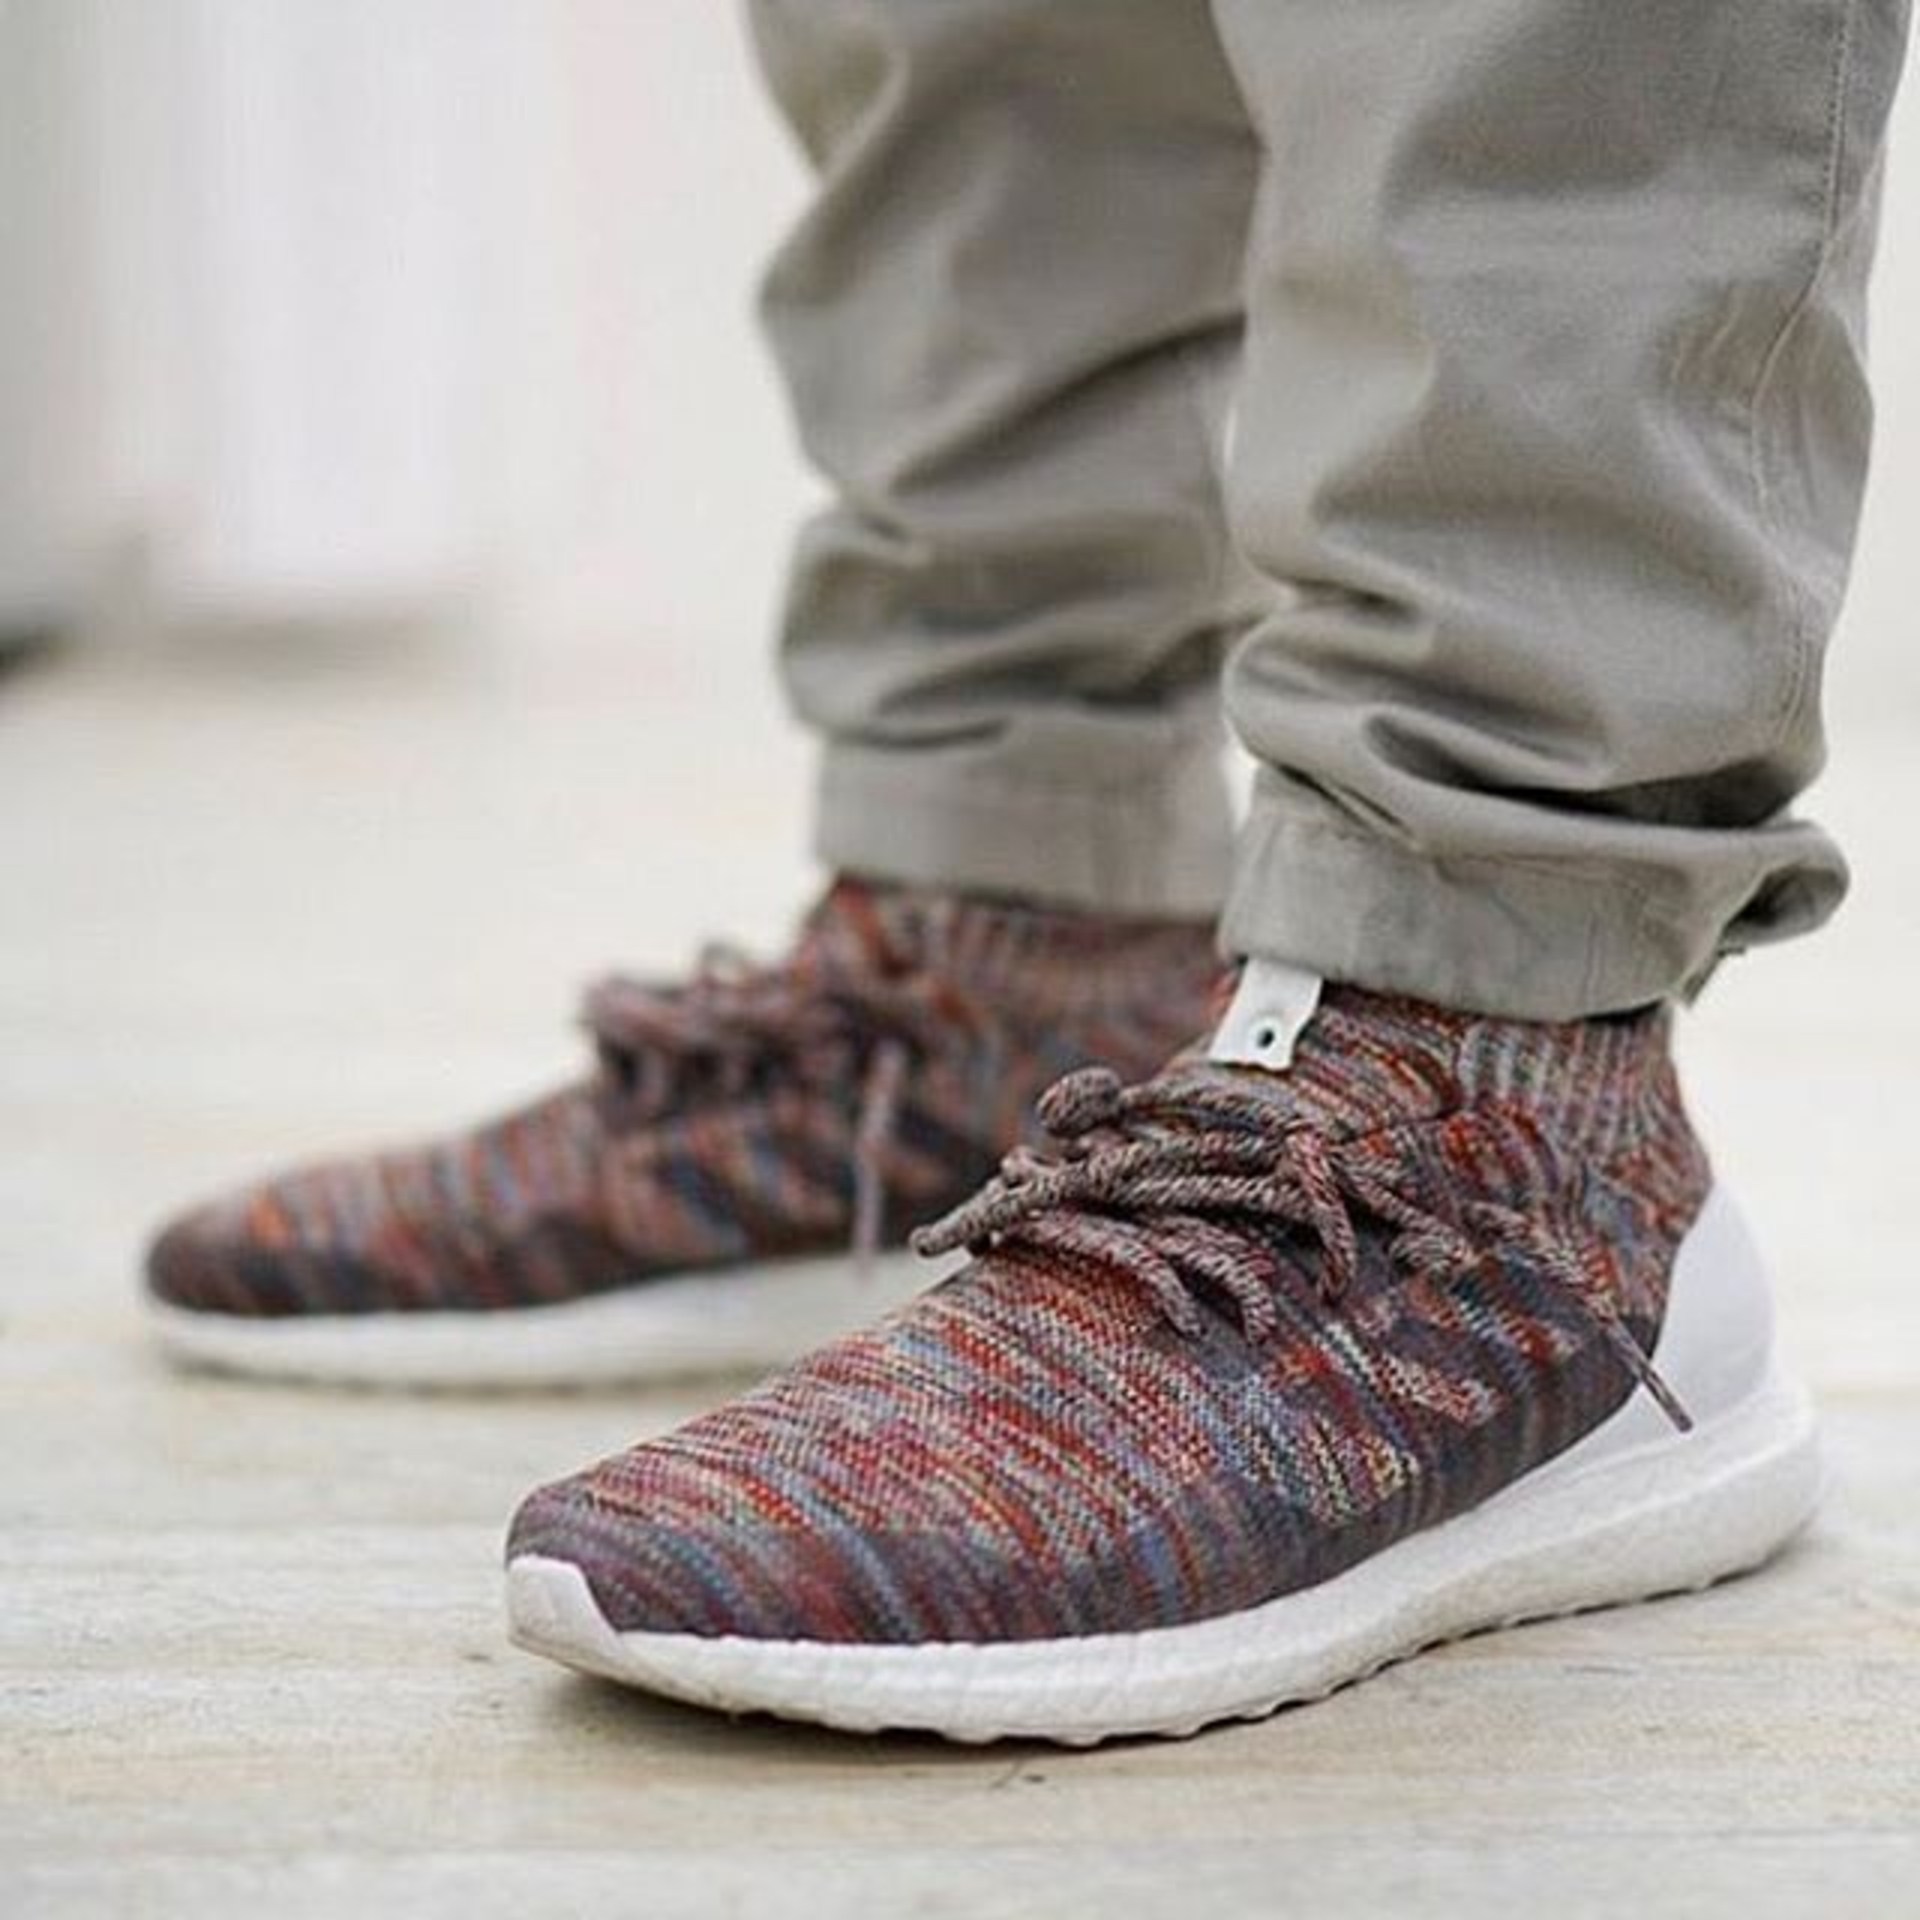 Android Mobiles Full Hd Resolutions 1080 X - Adidas Ultra Boost Atr Mid Kith , HD Wallpaper & Backgrounds